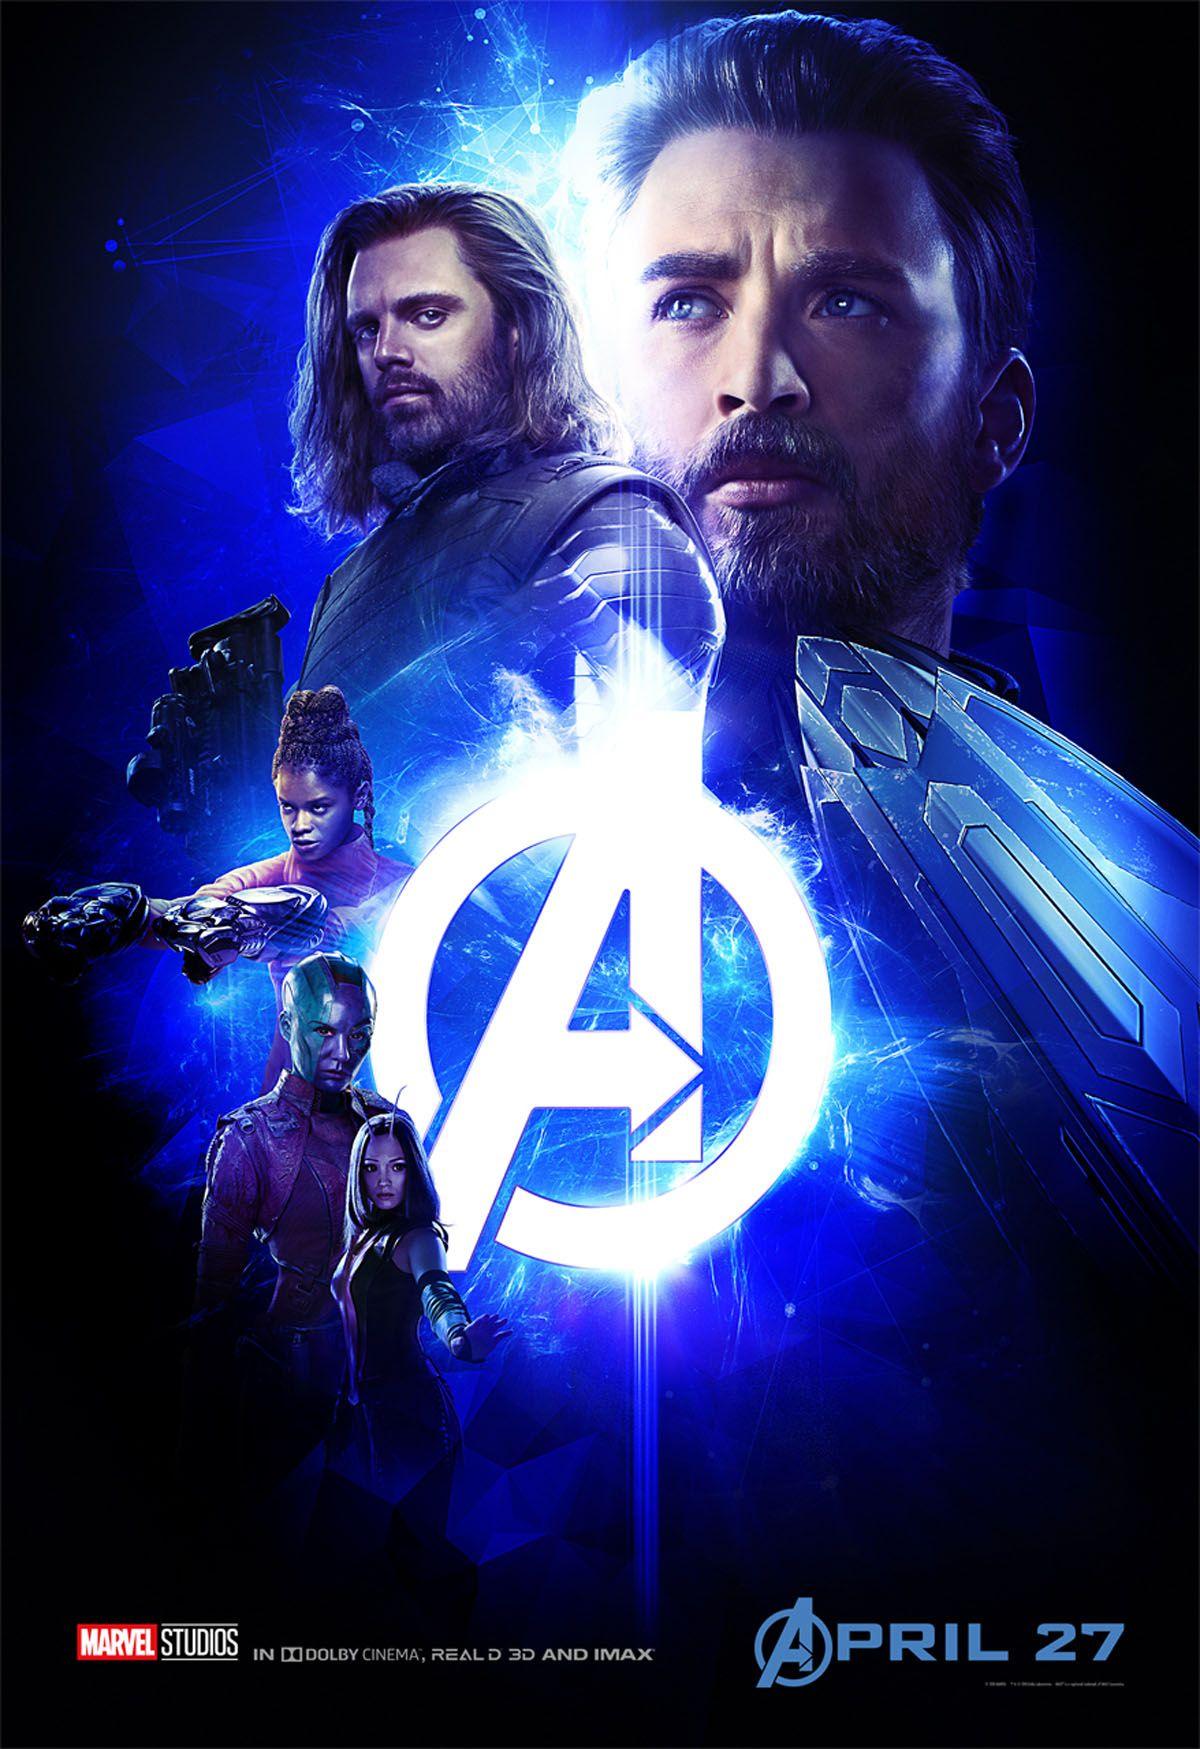 AVENGERS: INFINITY WAR Unleashes 5 New Posters